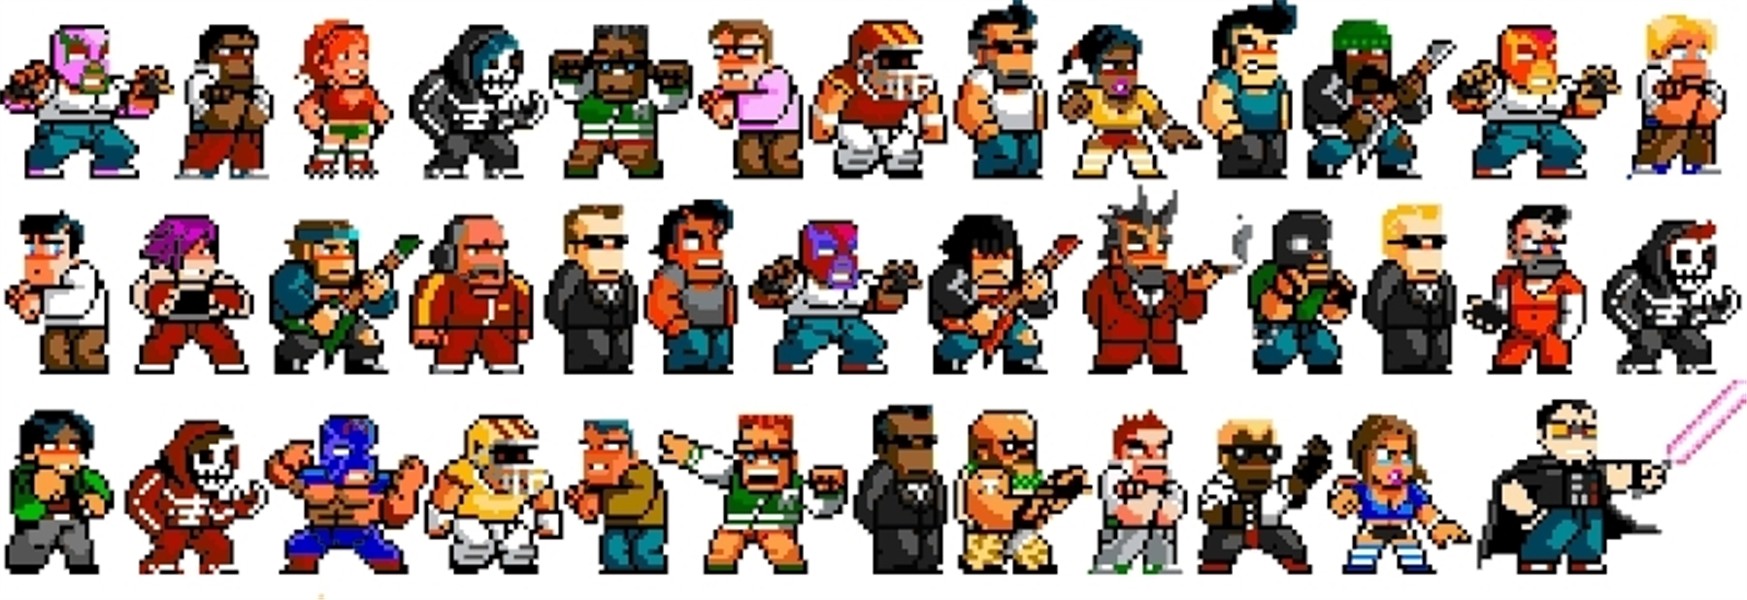 River City Ransom: Underground Dev Wants To Bring The Game T